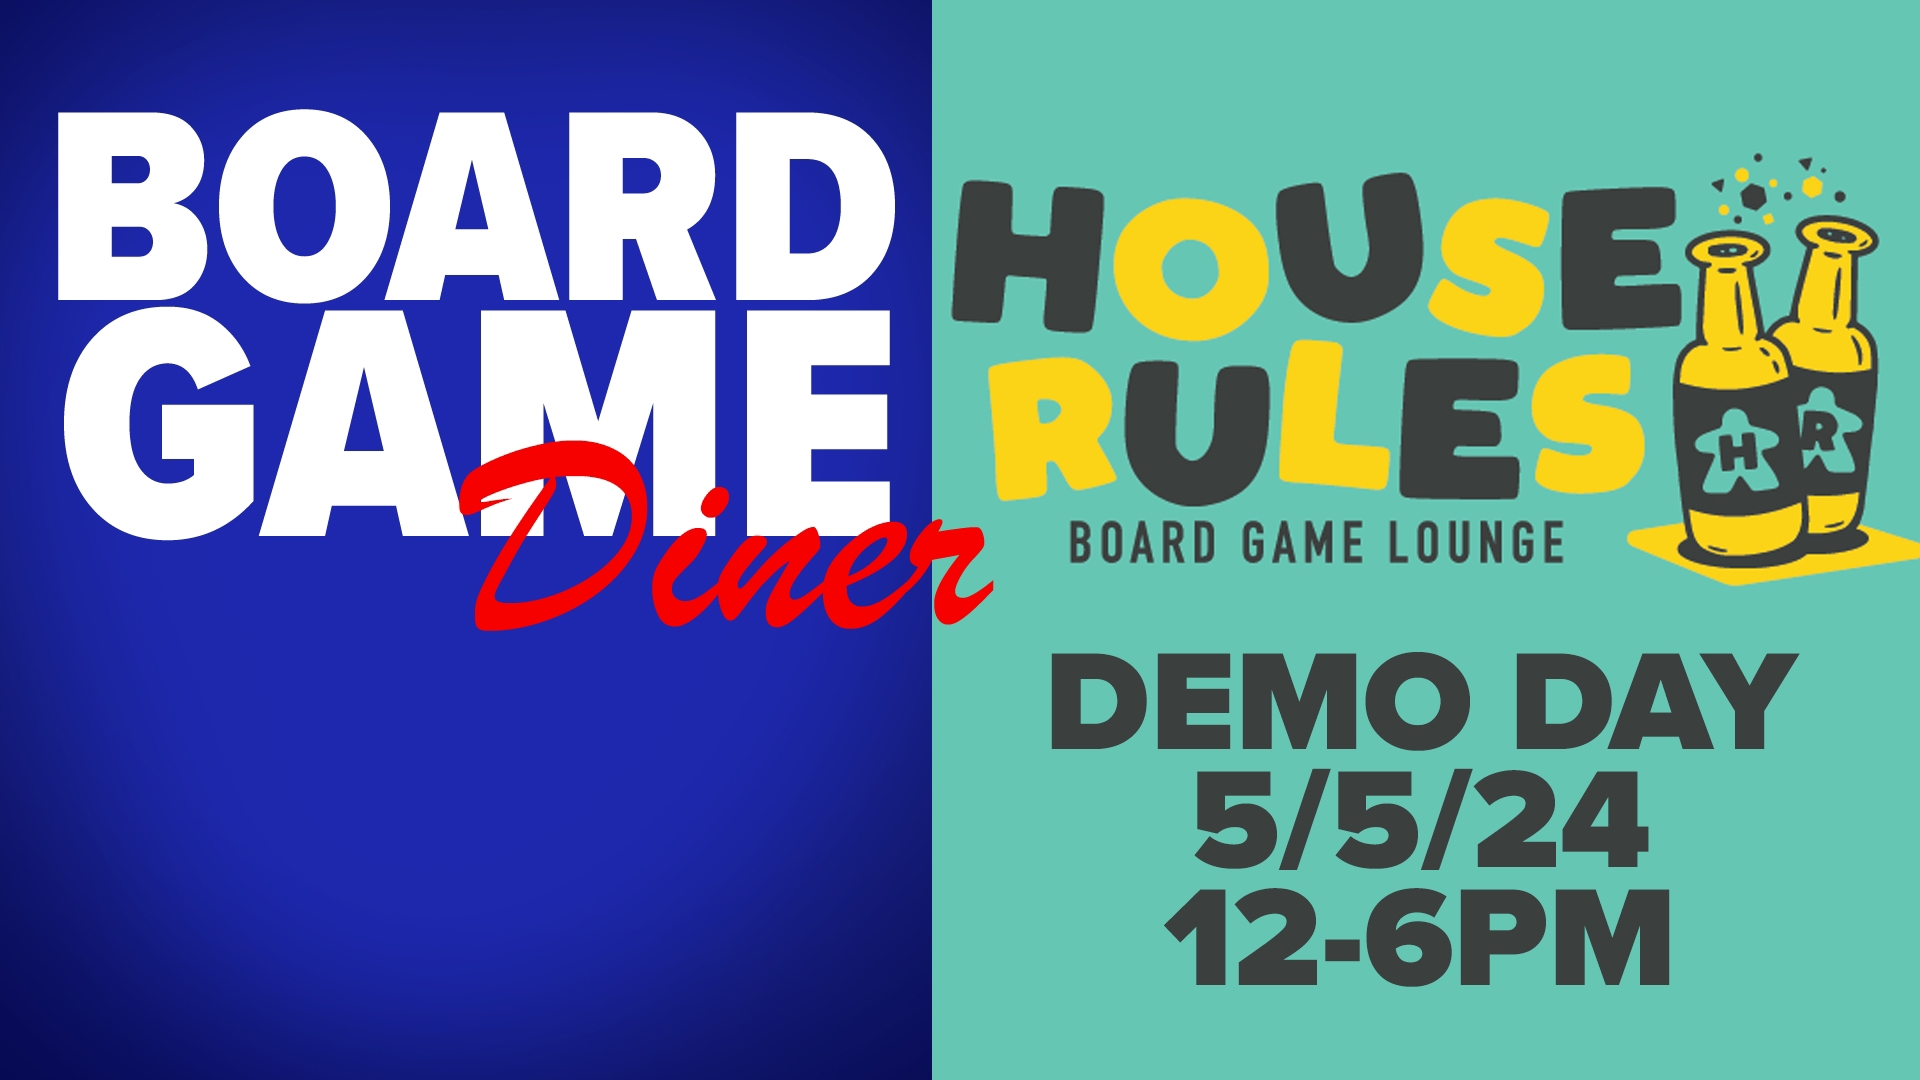 Learn about Demo day and where you can learn a game from Board Game Diner Server, Jon.